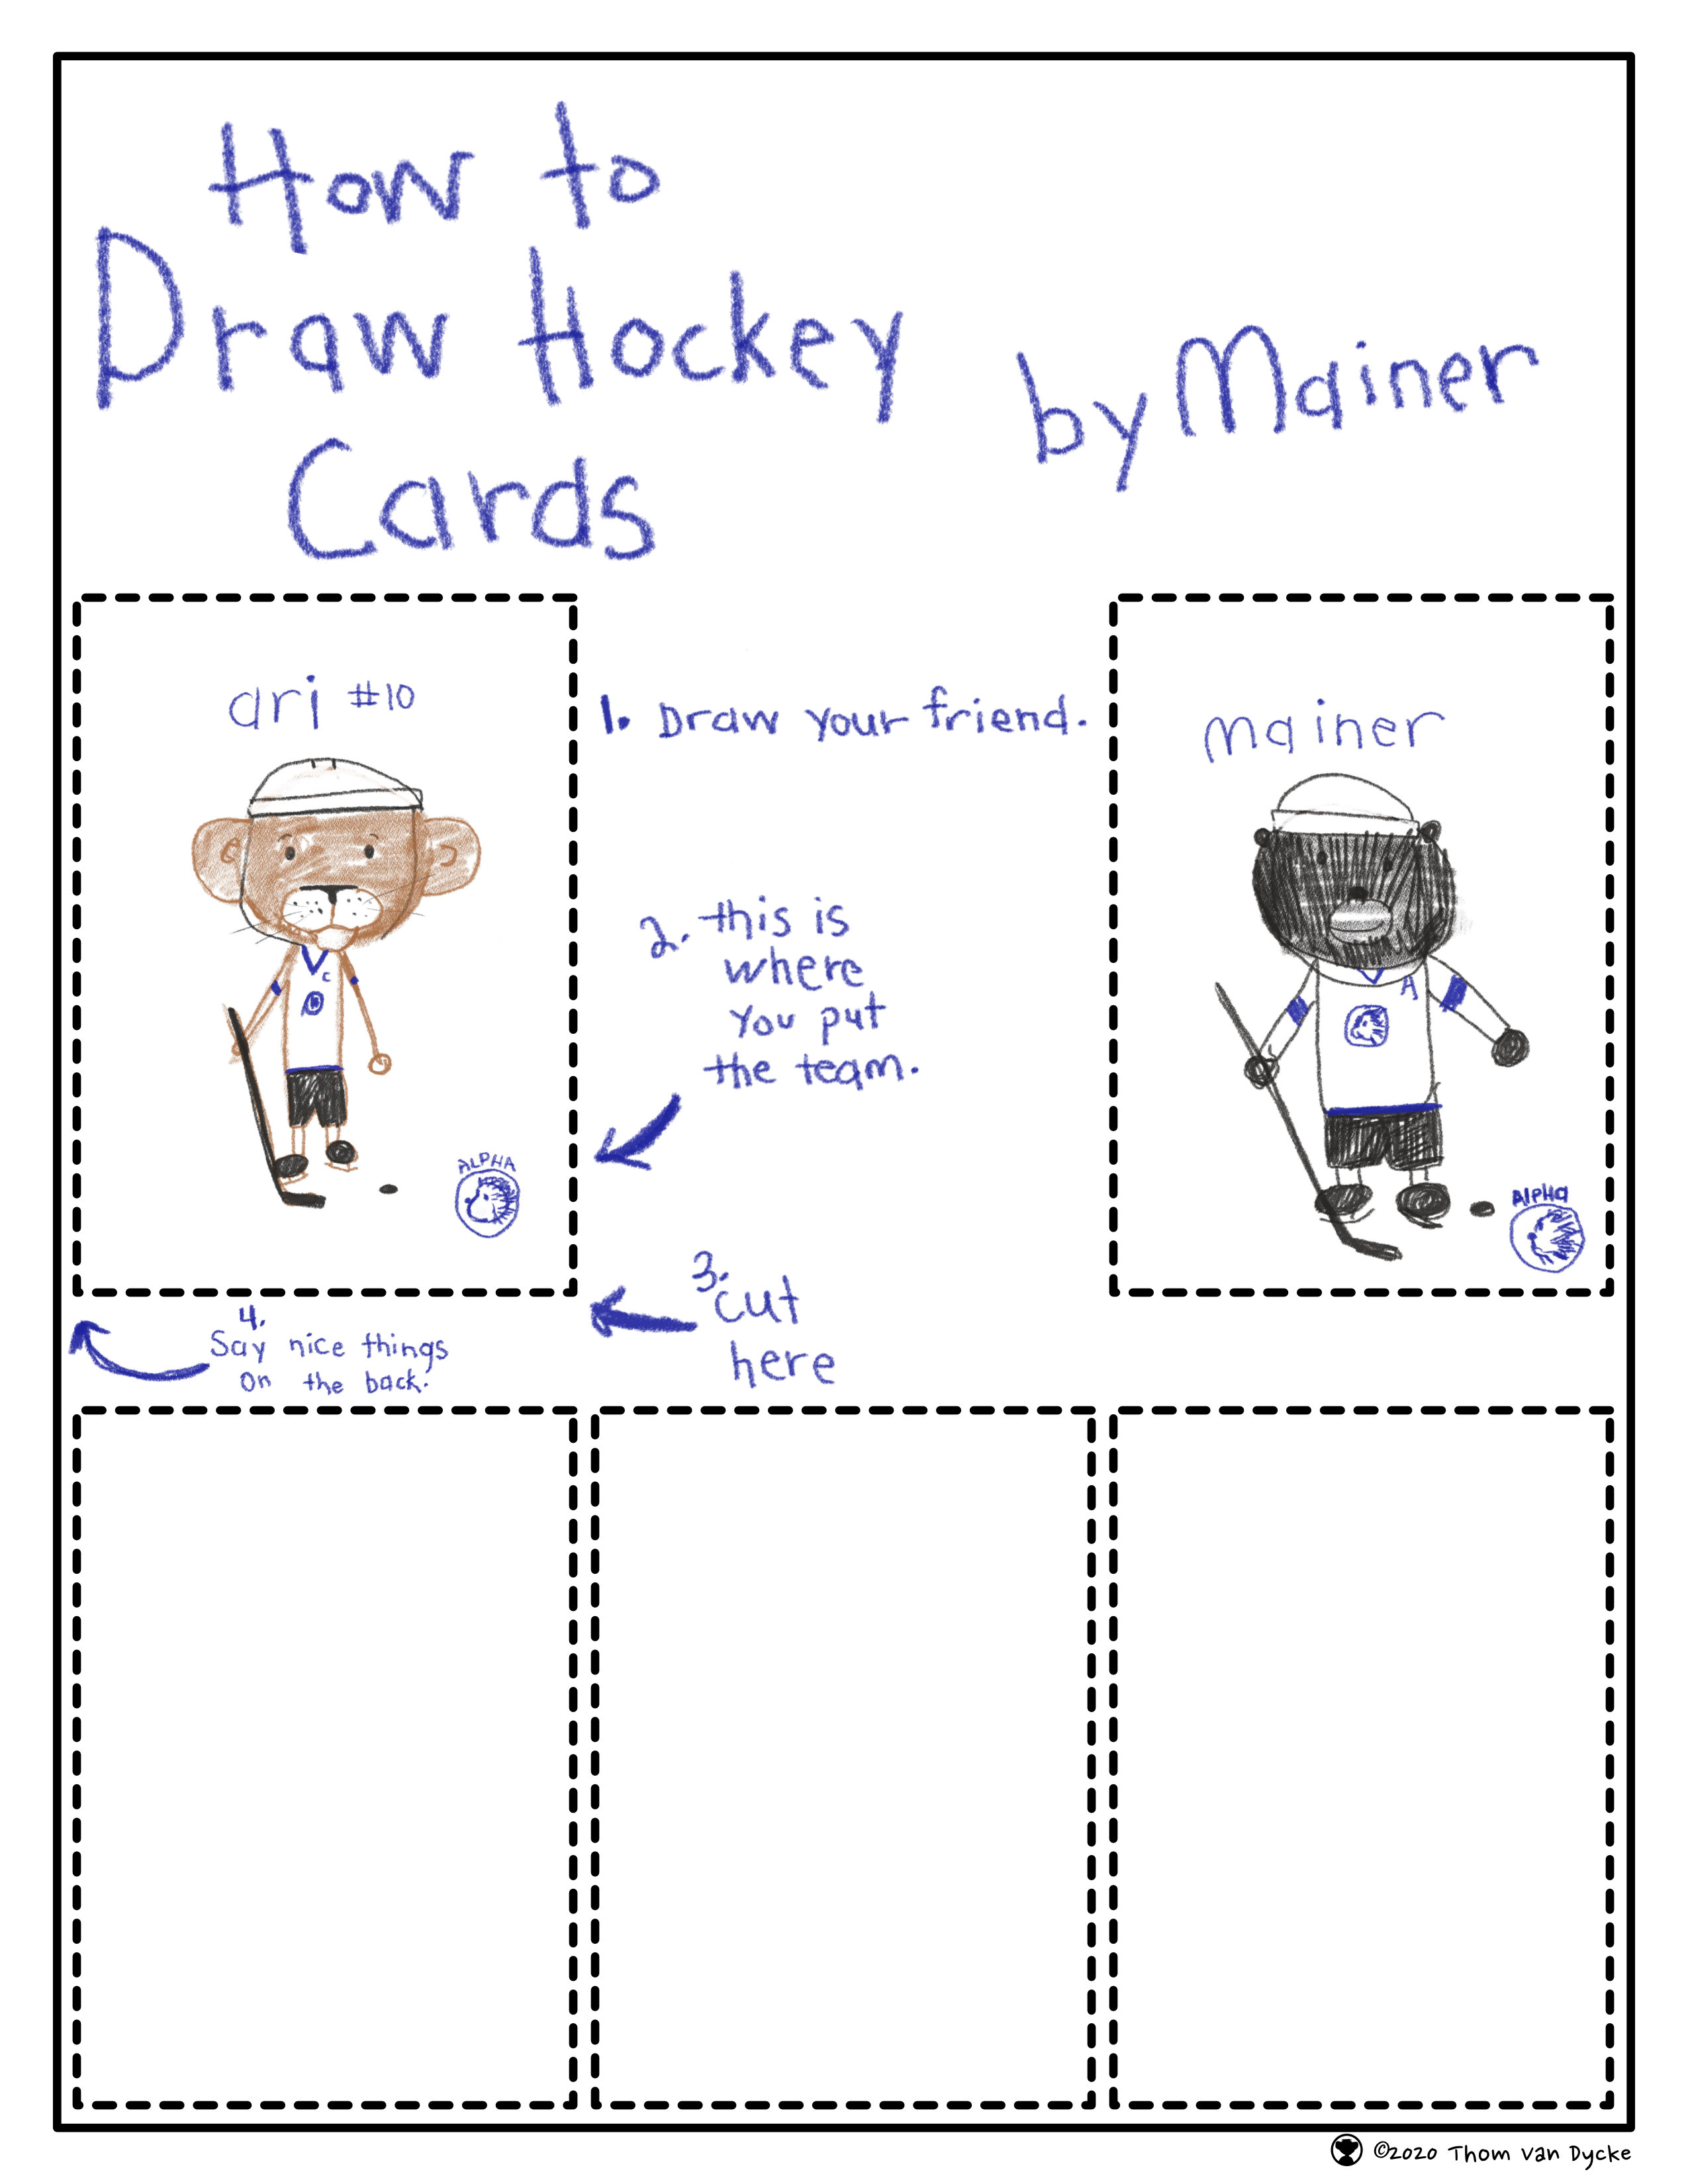 How to draw hockey cards by Mainer